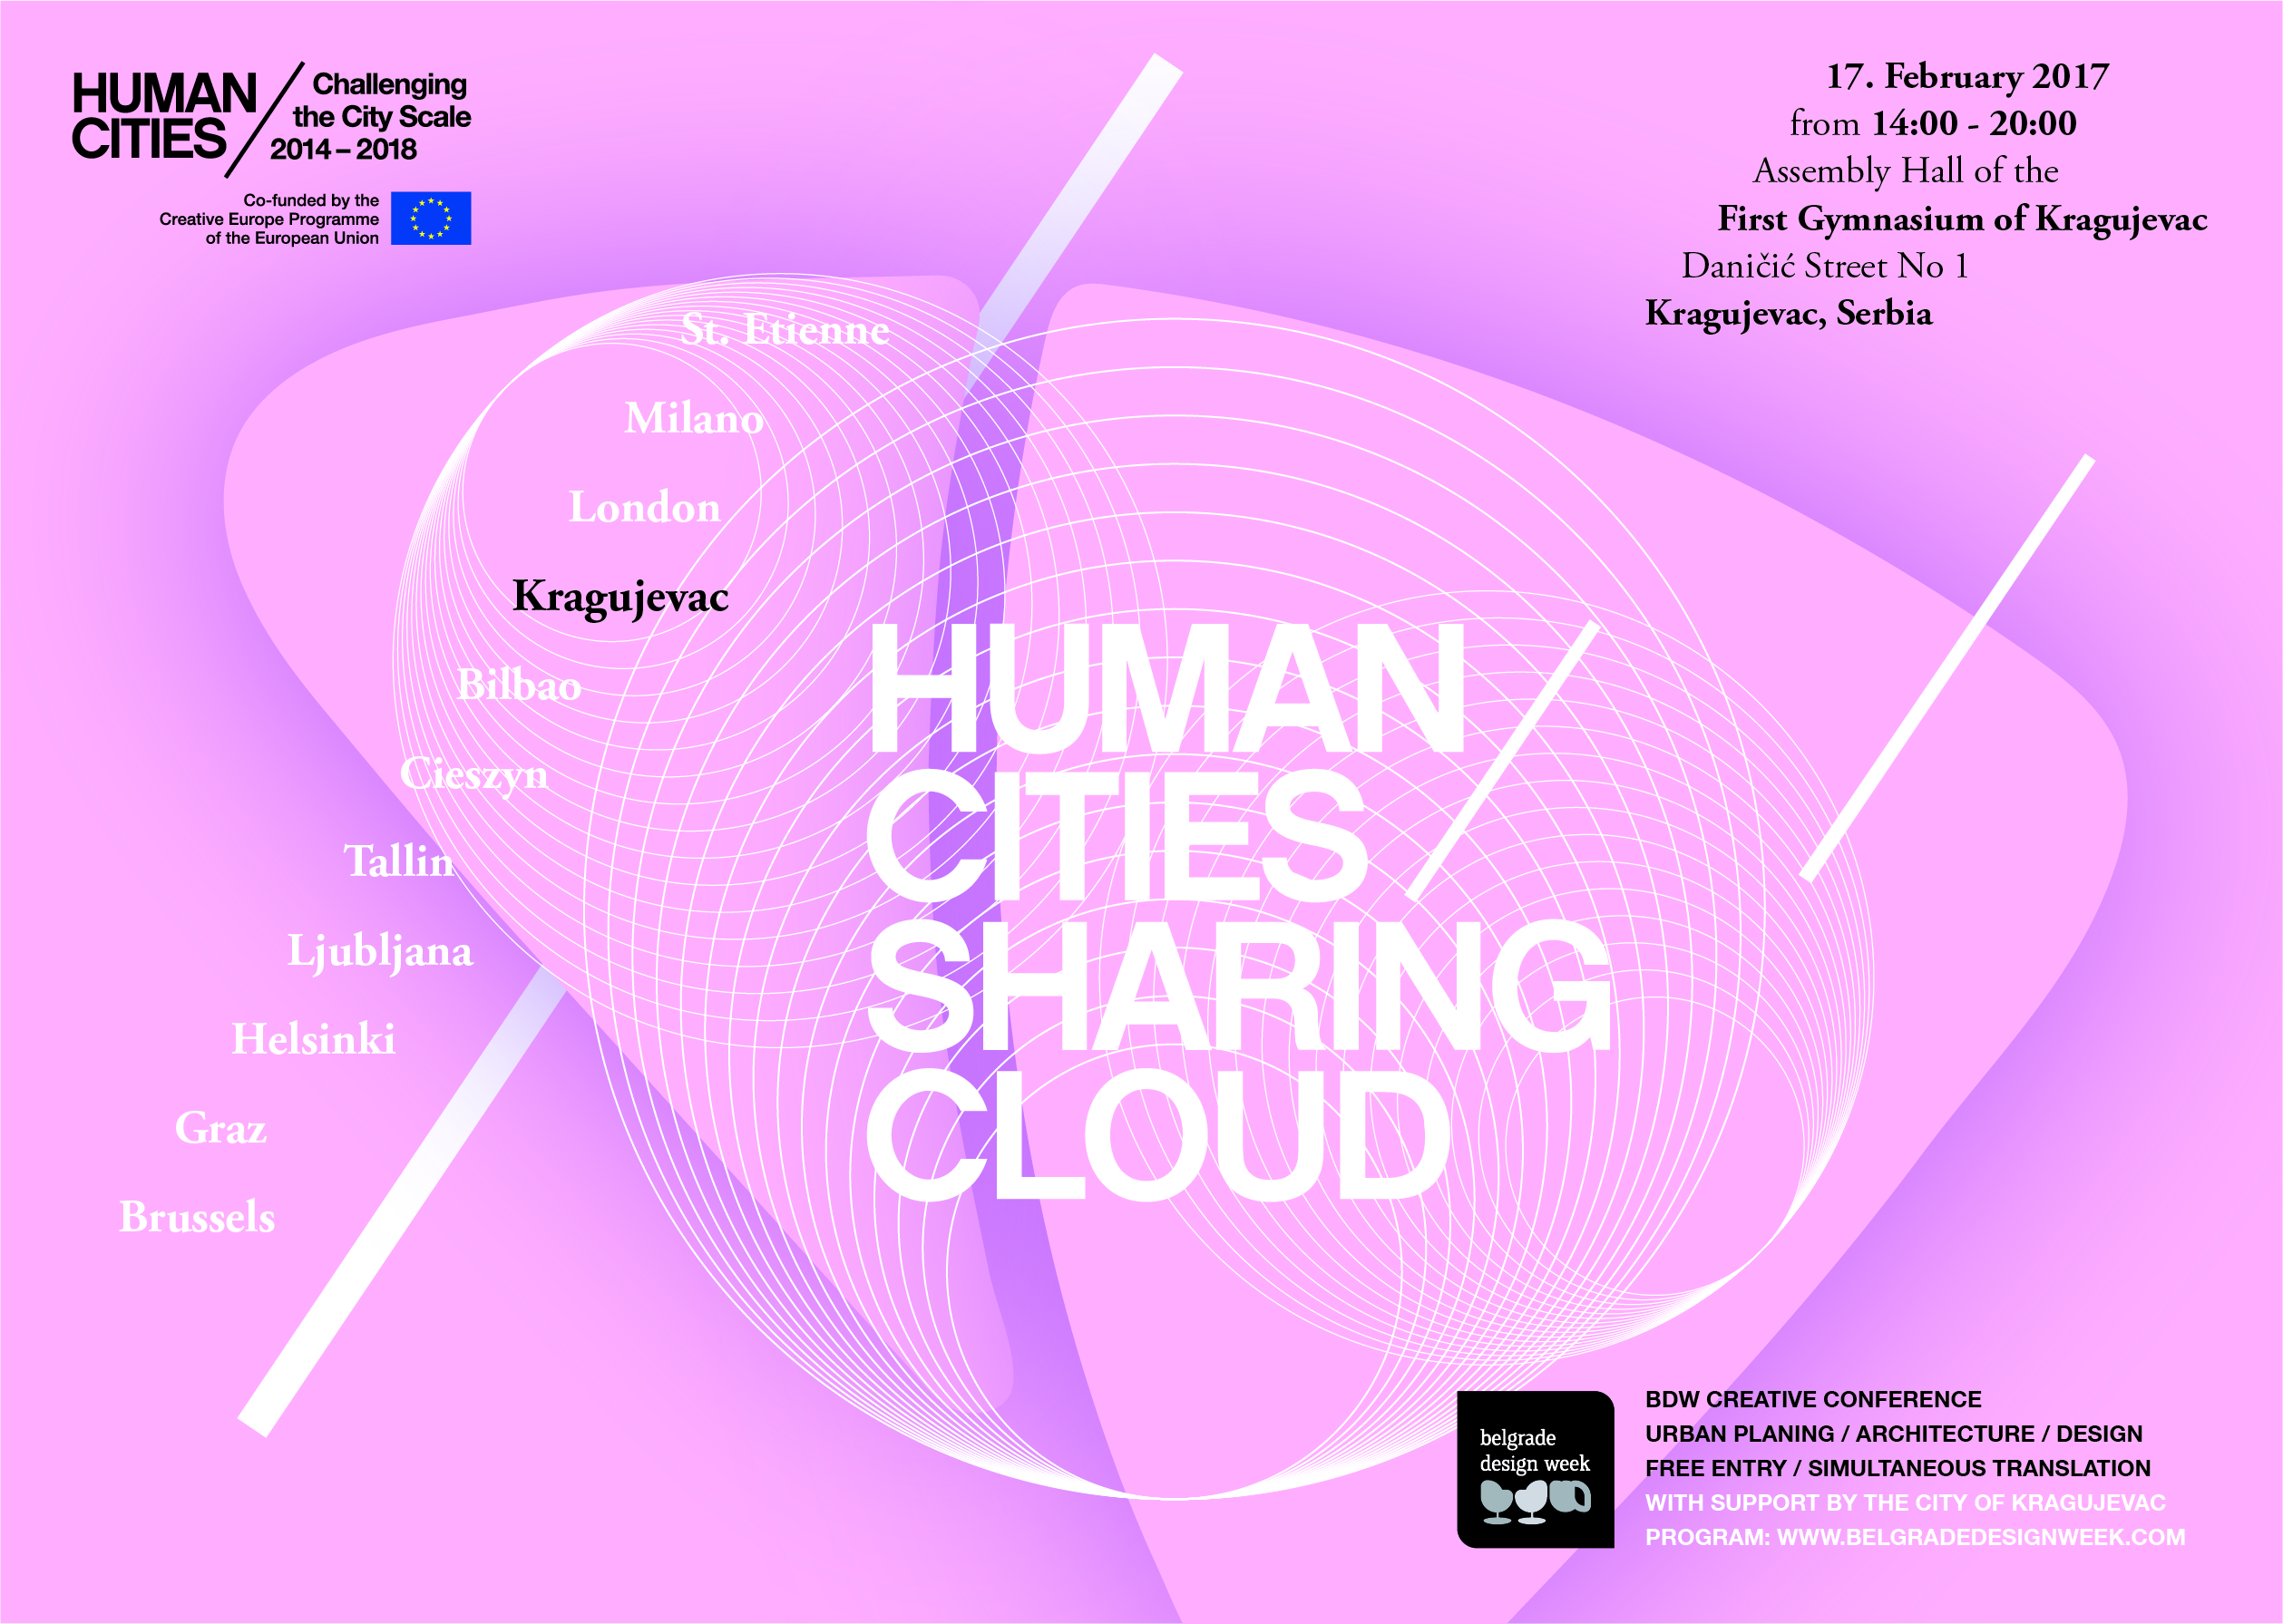 BDW INVITES YOU TO THE HUMAN CITIES/ SHARING CLOUD CREATIVE CONFERENCE IN KRAGUJEVAC